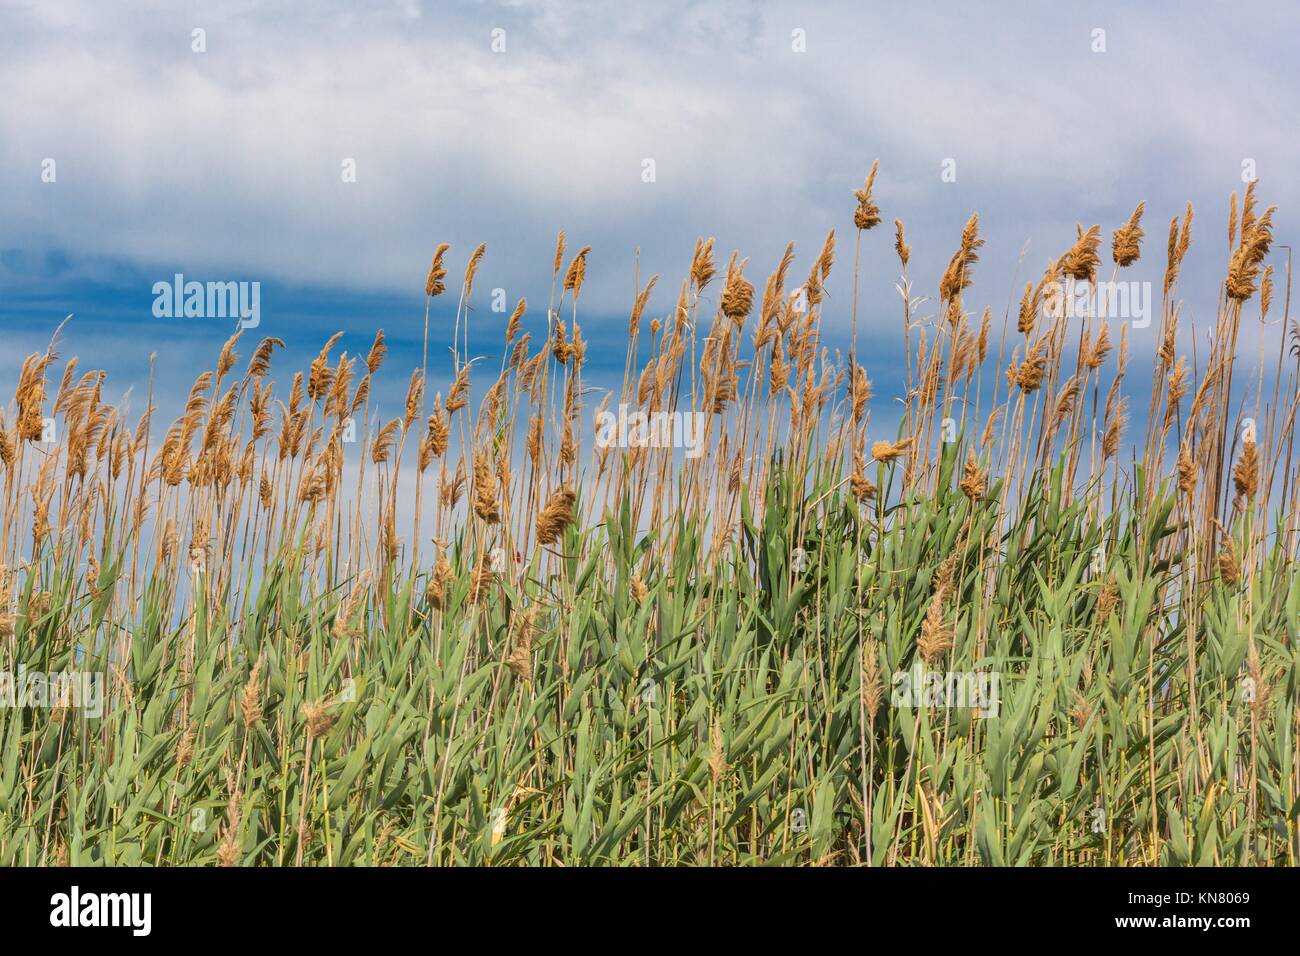 Fluffy grass on the field on cloudy sky background. Stock Photo